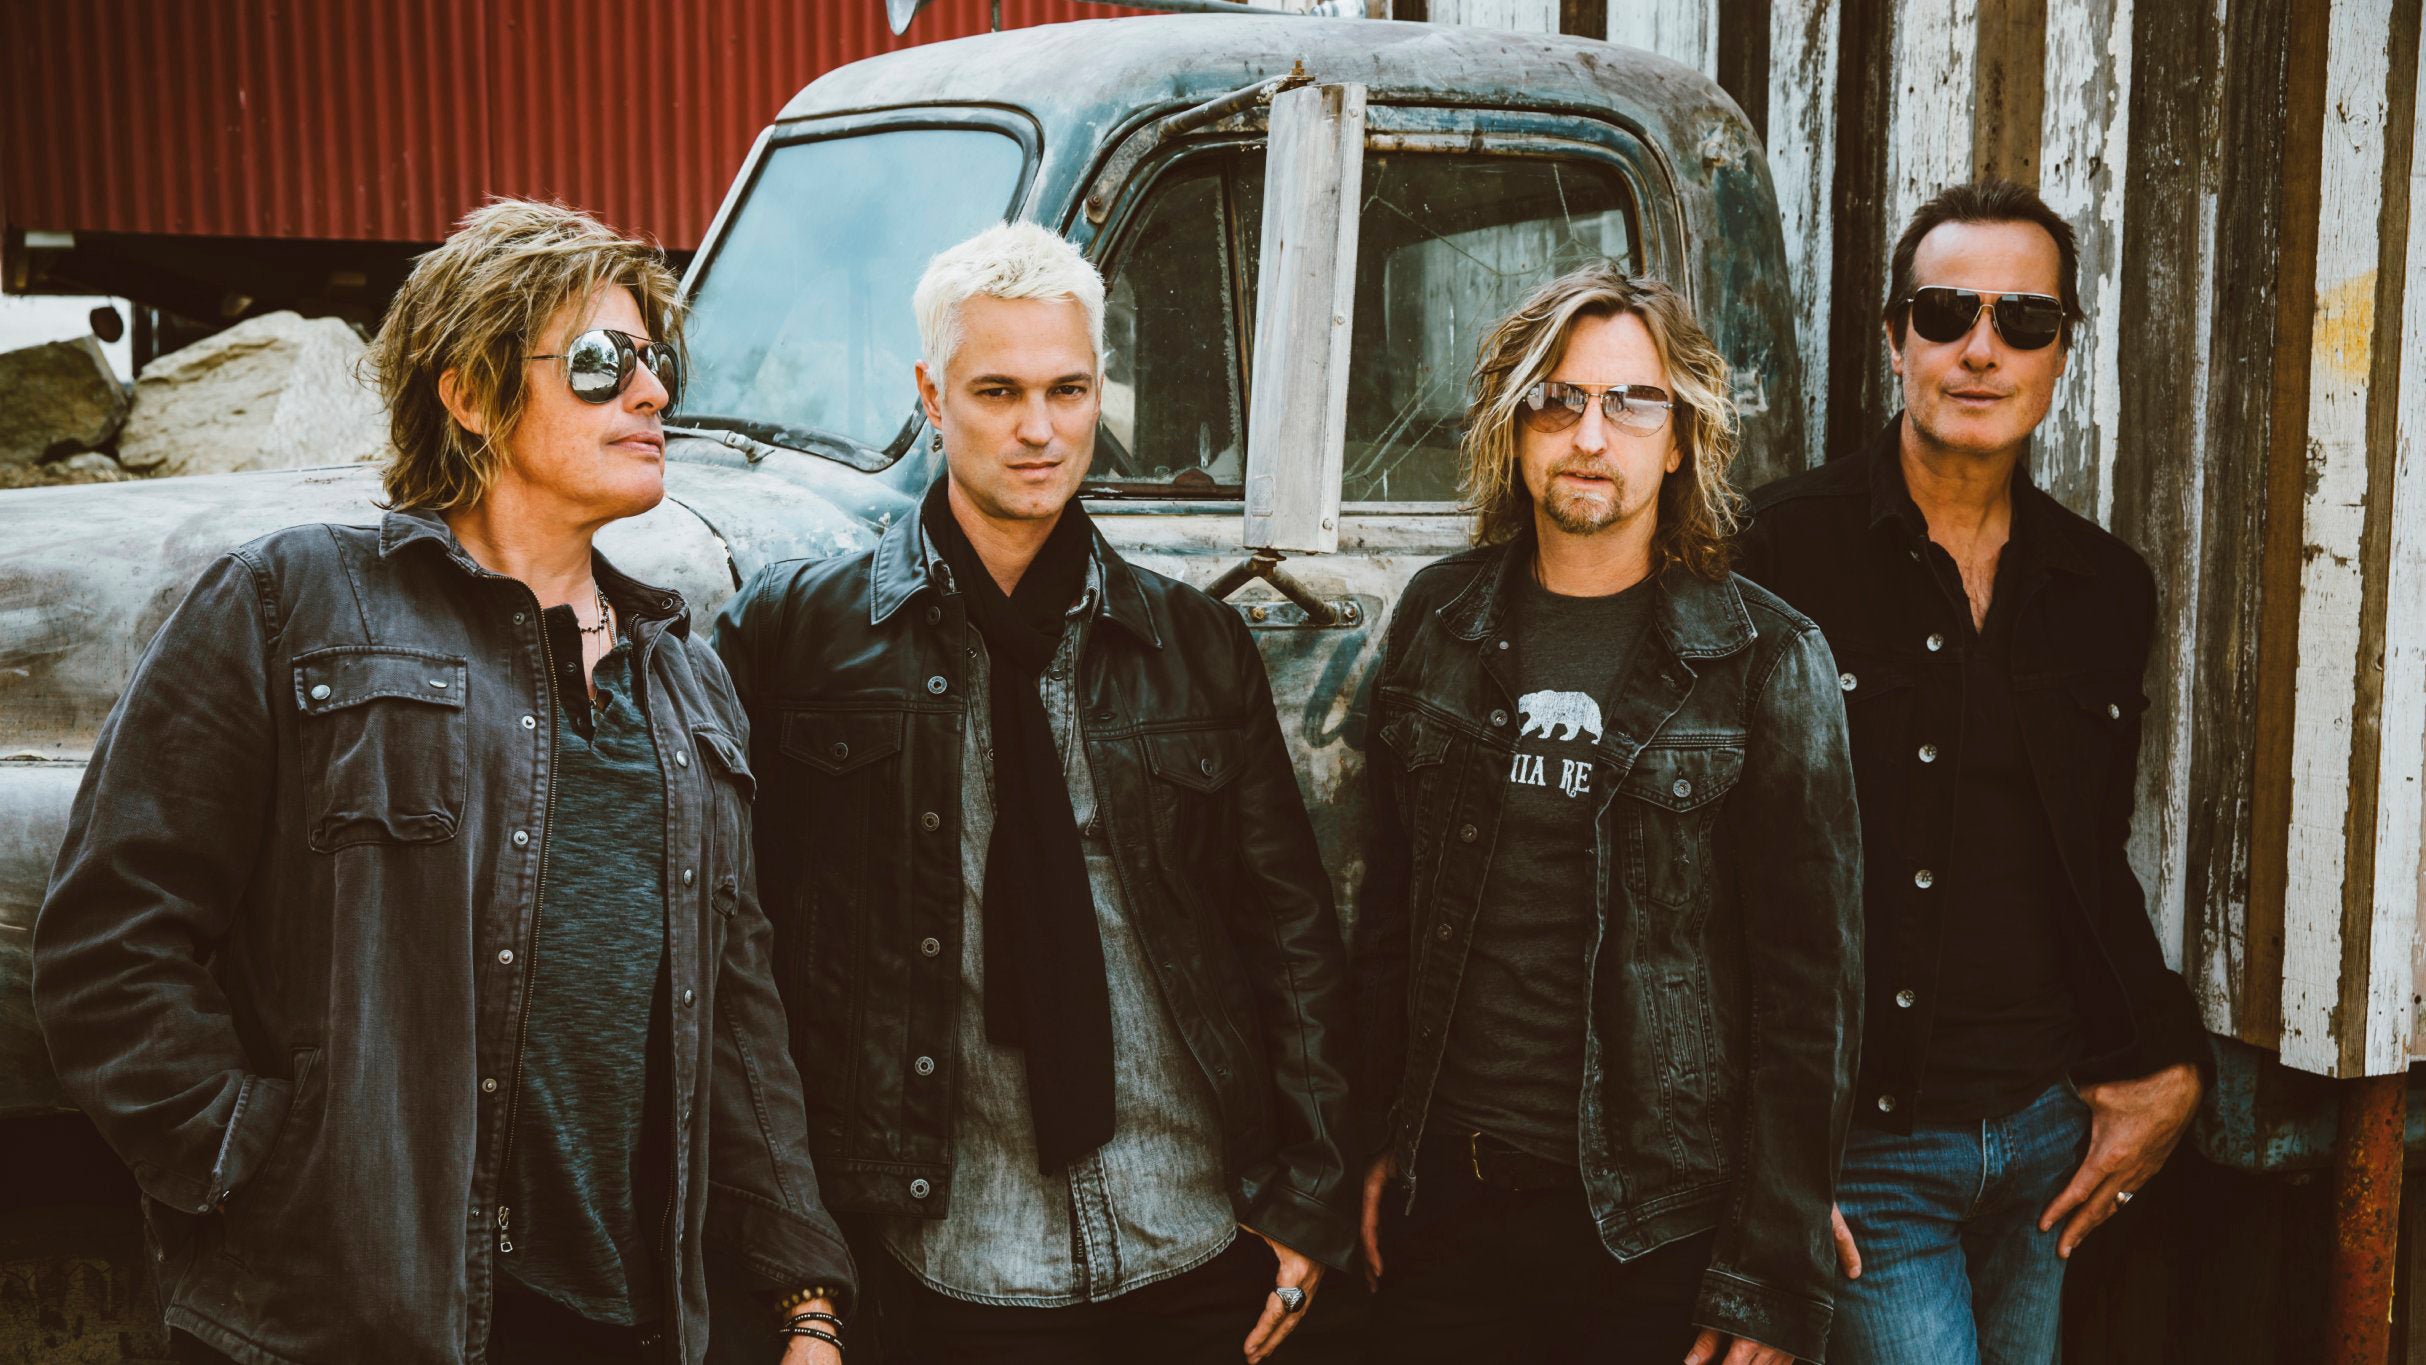 Lamont & Tonelli Ball: Stone Temple Pilots & +LIVE+  presale password for real tickets in Concord